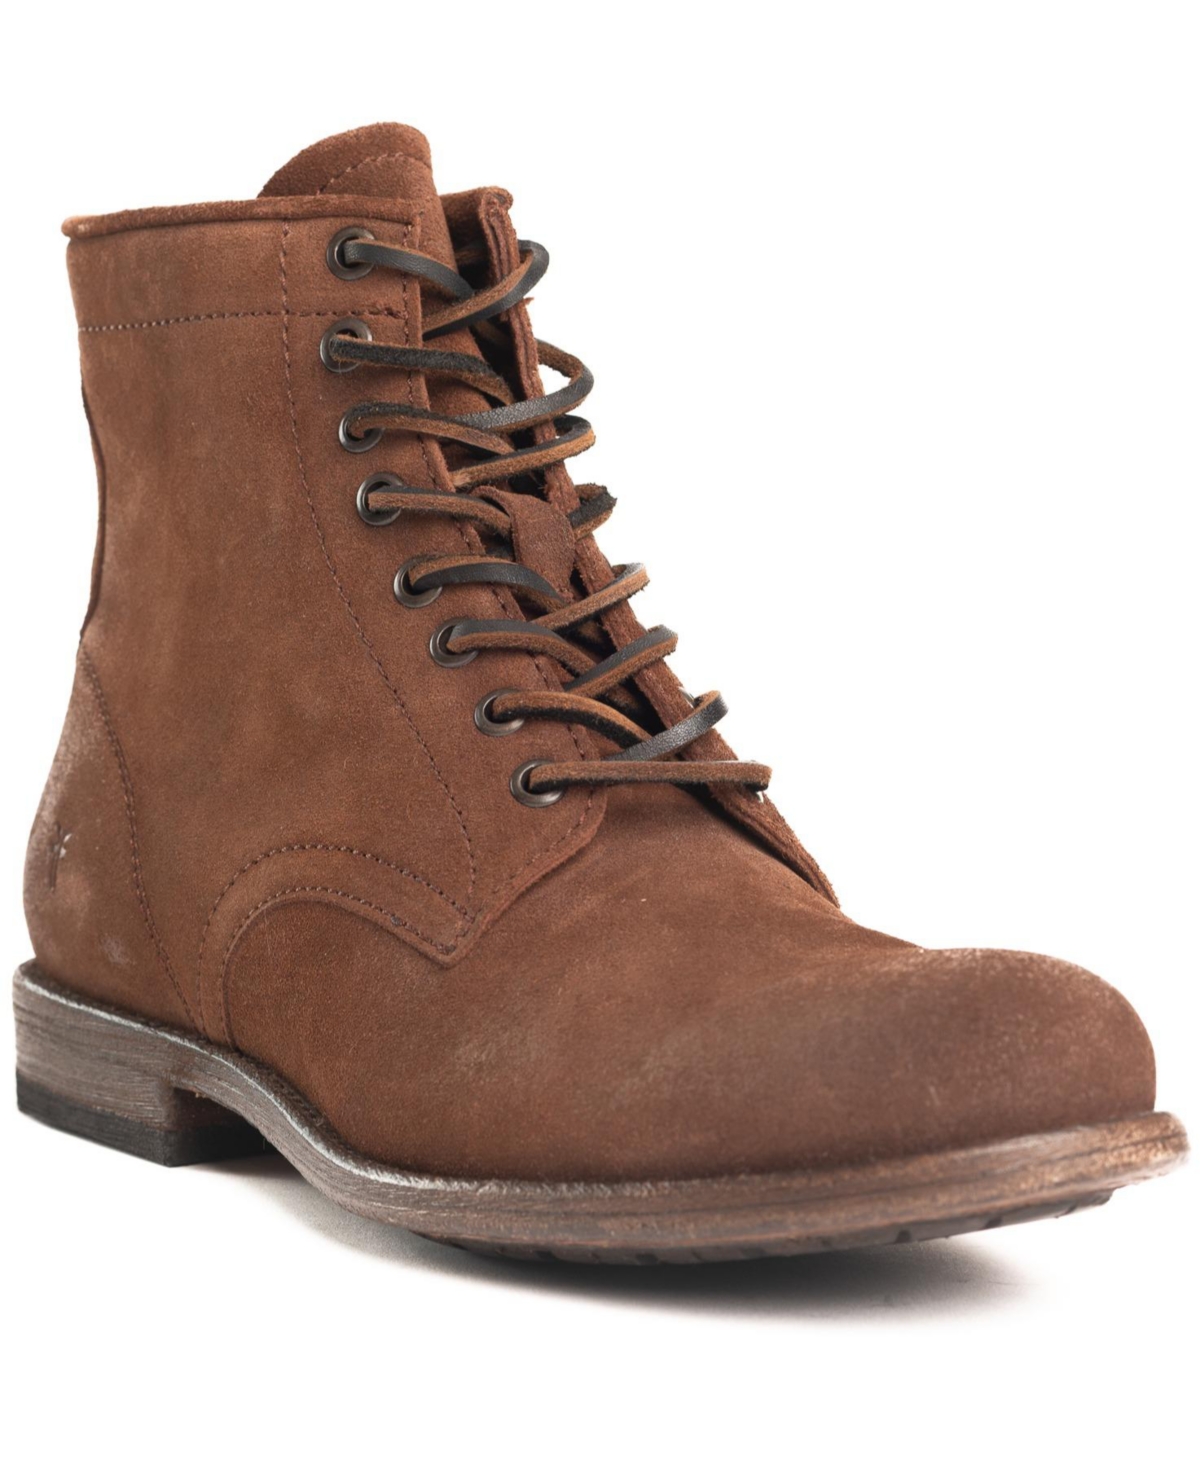 Men's Tyler Lace-up Boots - Brown Suede